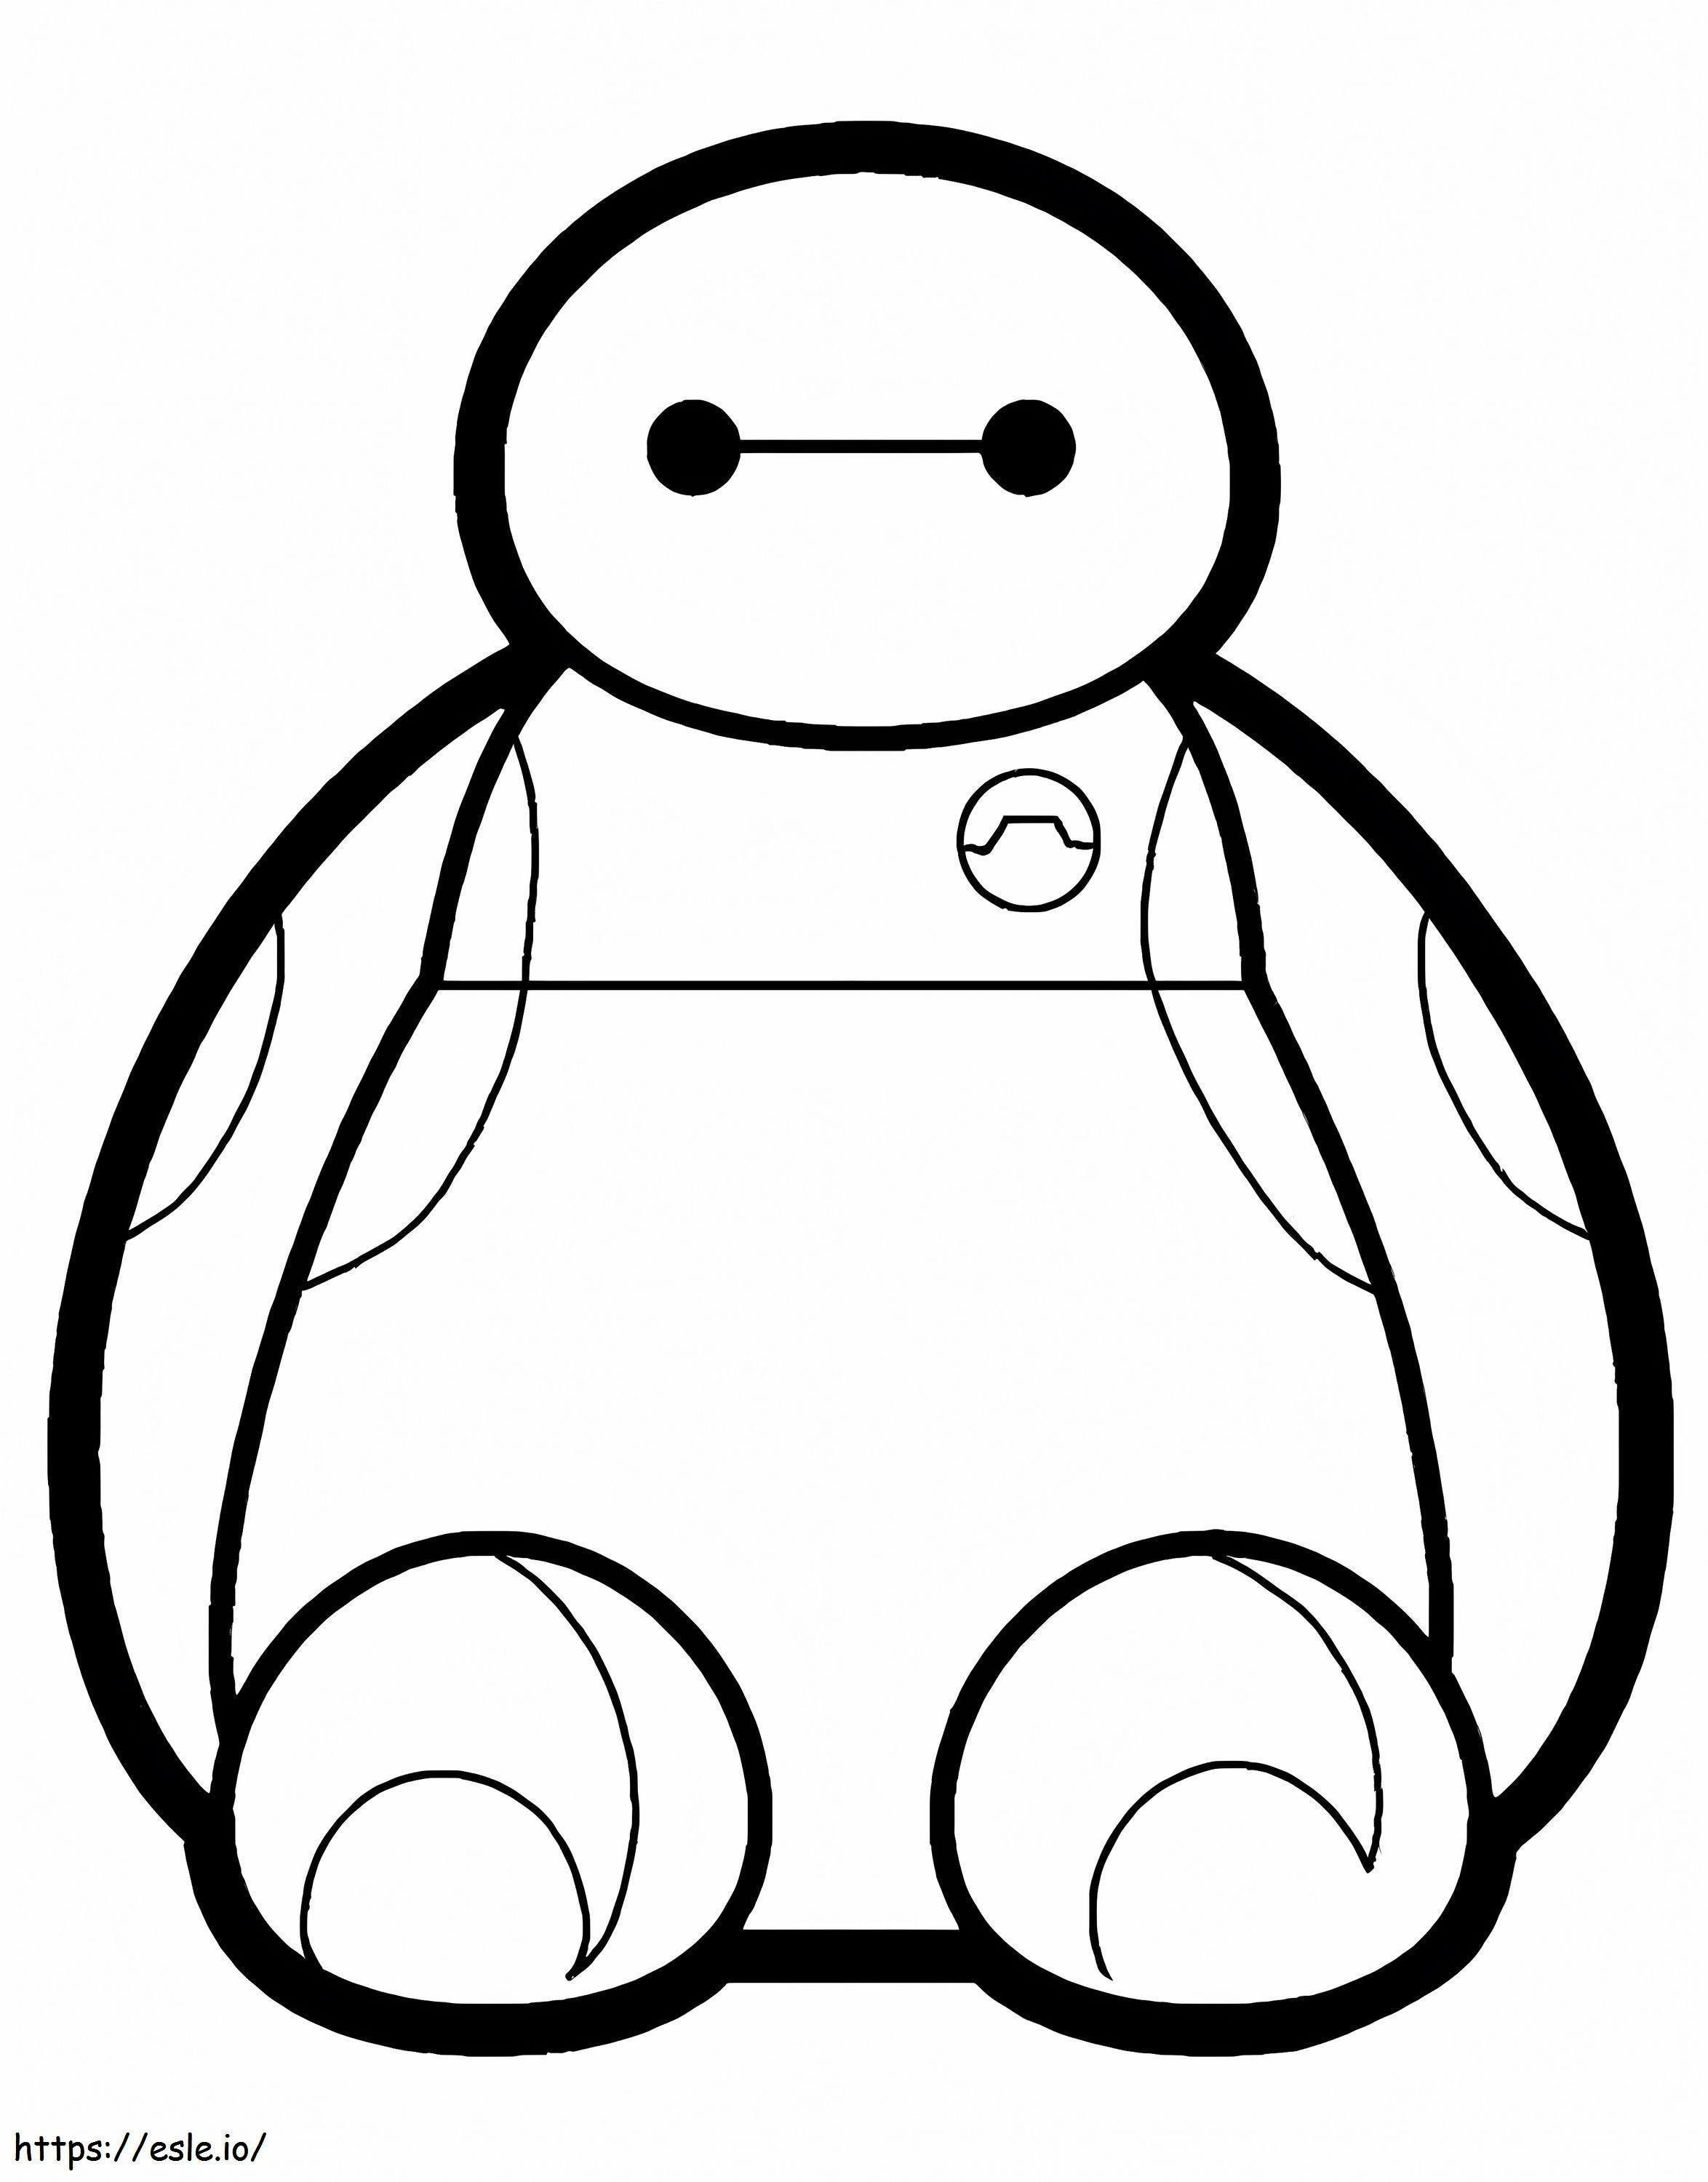 Baby Baymax coloring page